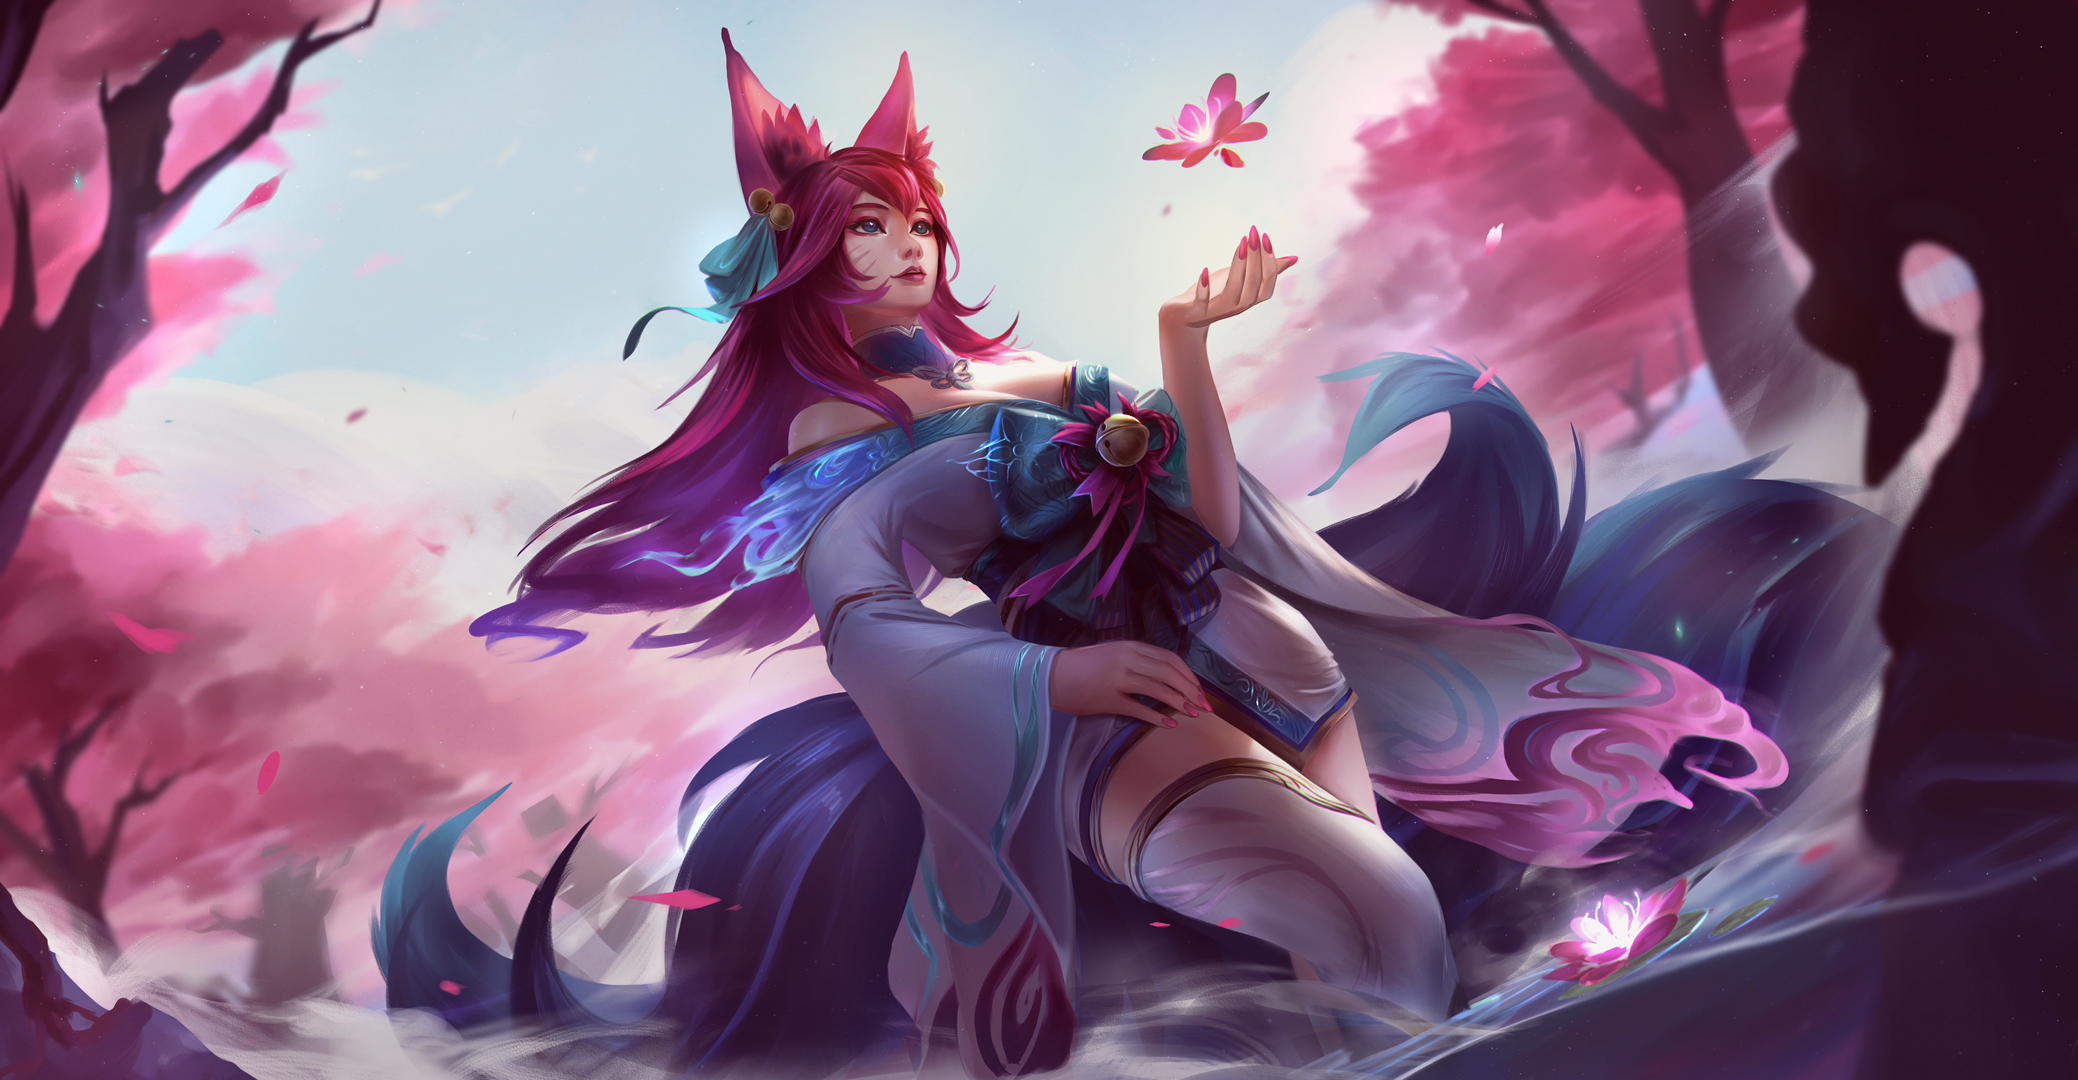 Ahri League Of Legends League Of Legends Fantasy Girl Video Games Video Game Girls Kimono Video Game 2078x1080